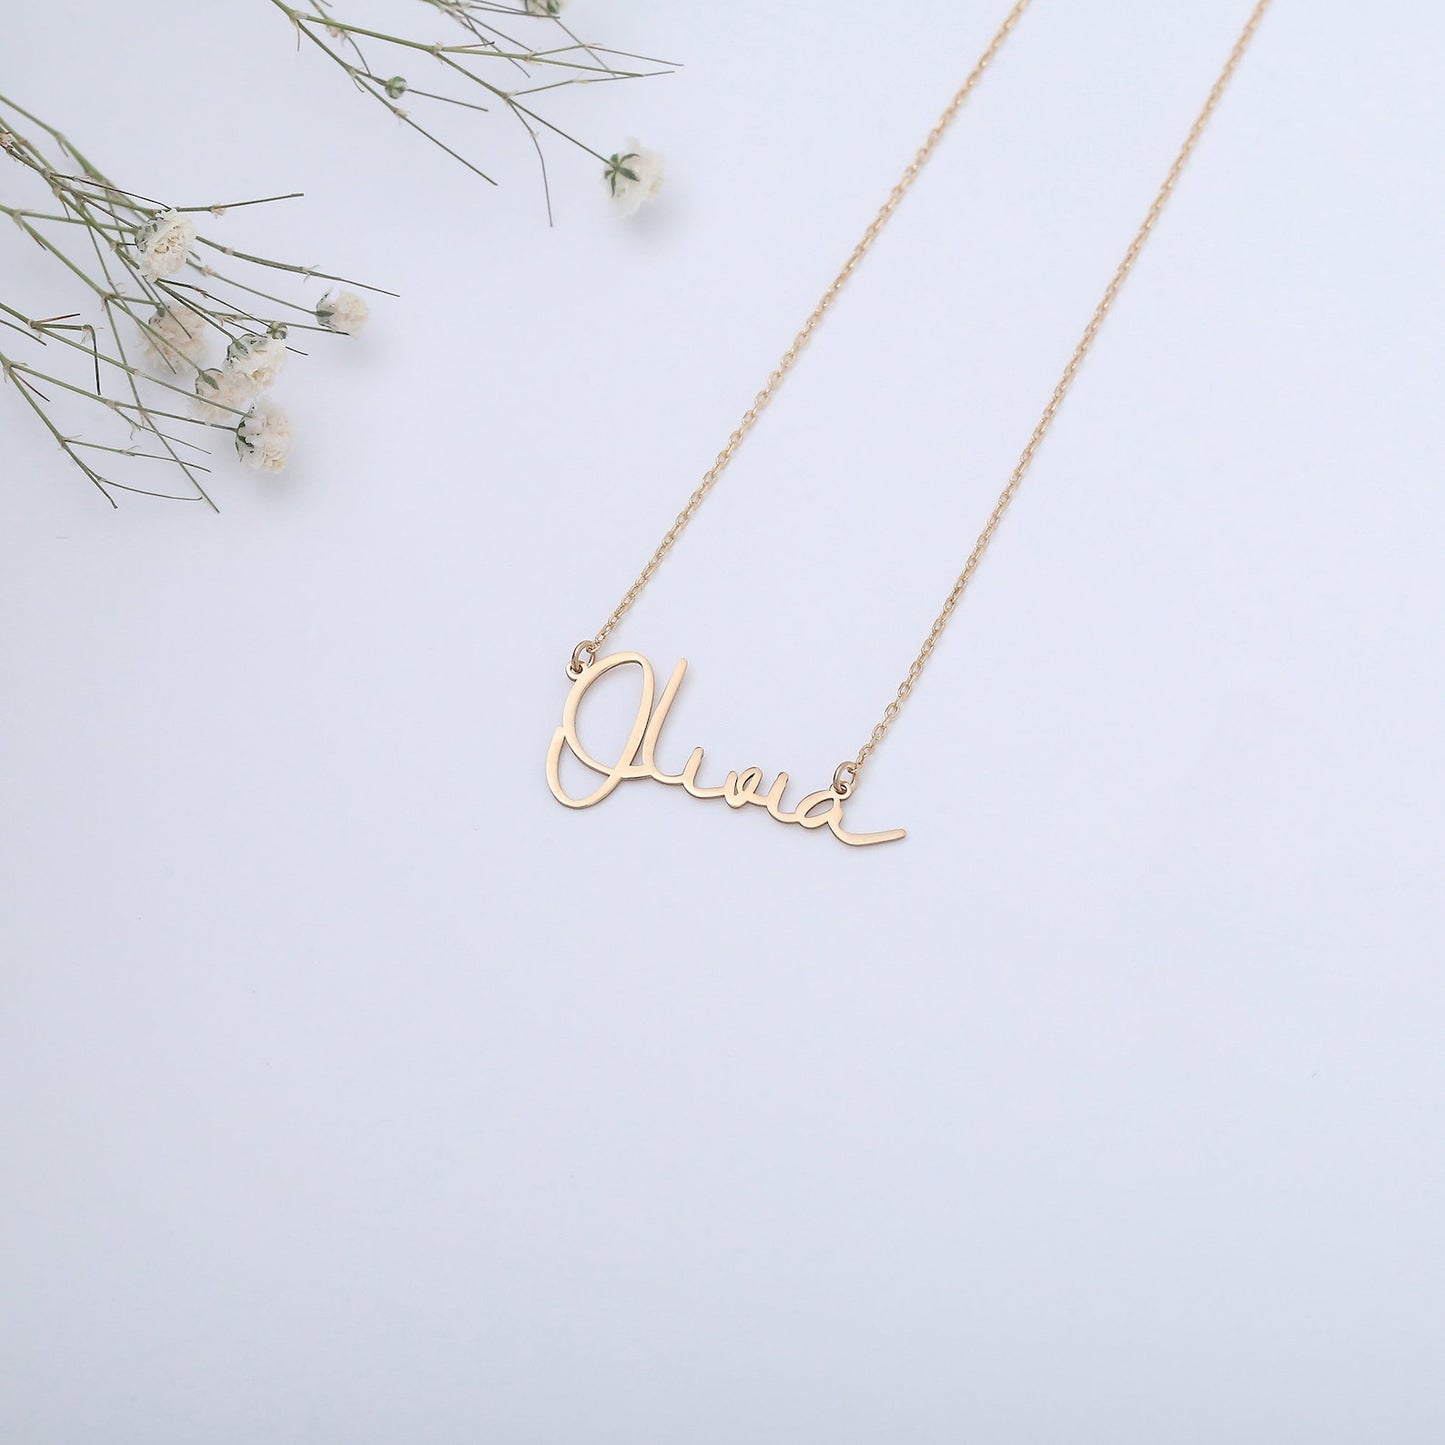 14K Solid Gold Name Necklace, Personalized Name Necklace, 14K Real Gold Name Necklace, Name Necklace Gold, Gift for Her, Christmas Gift